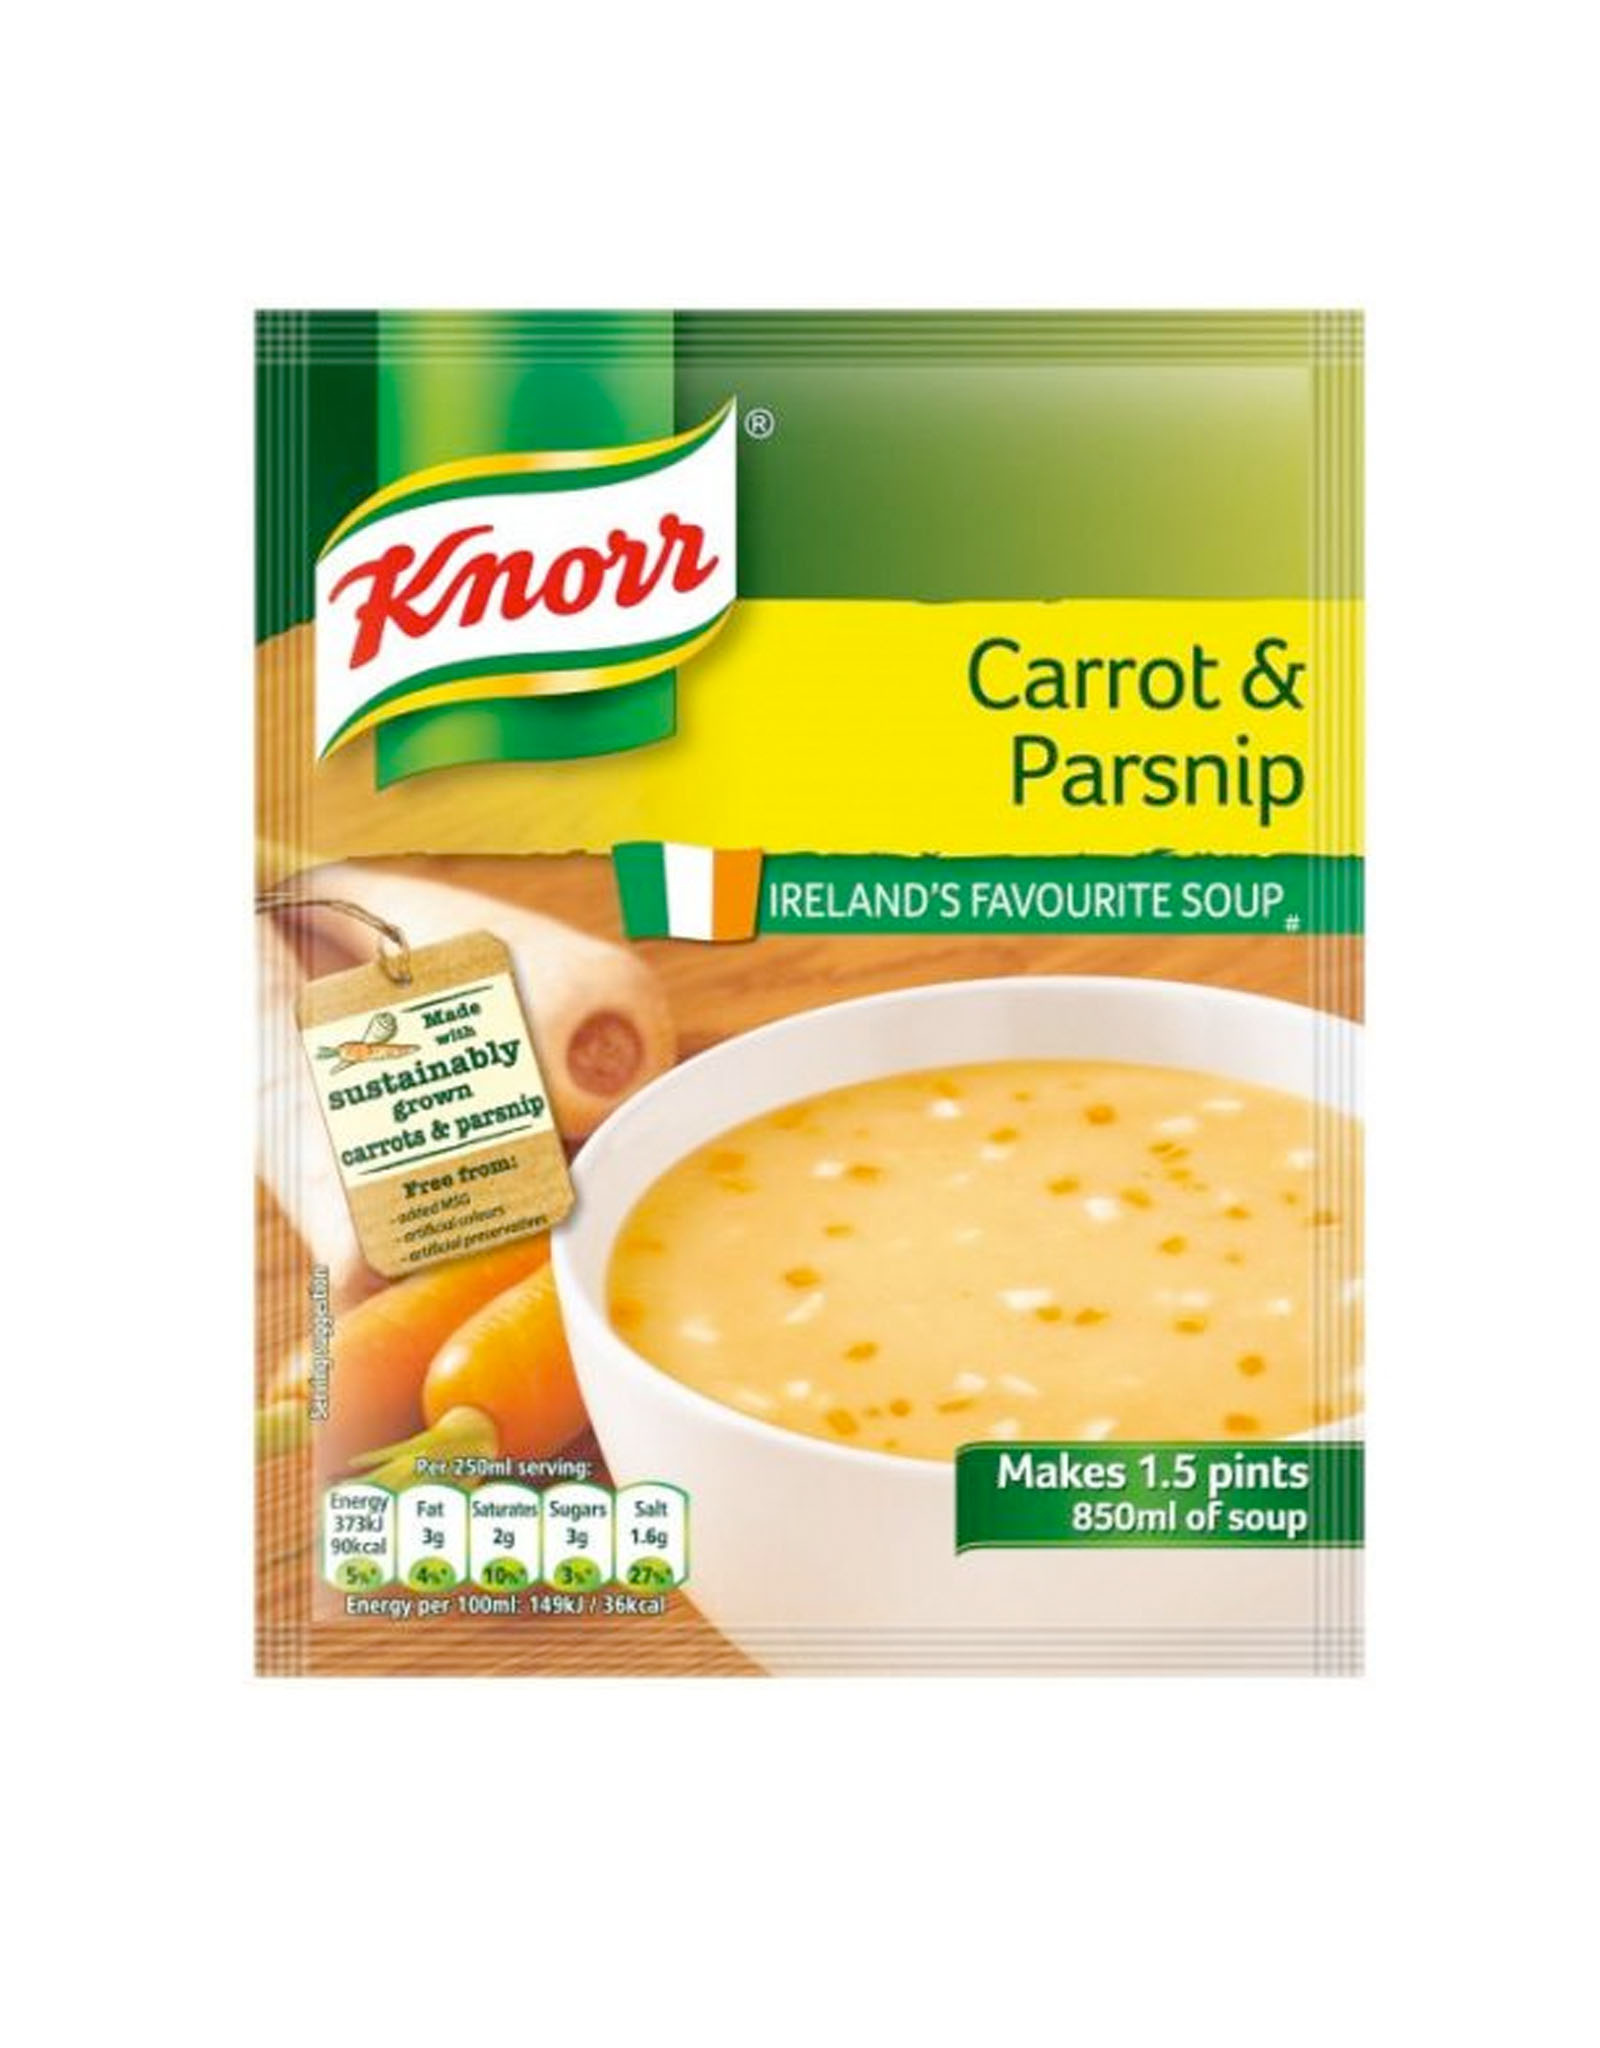 PANTRY STAPLES KNORR CARROTS & PARSNIPS SOUP (73g)